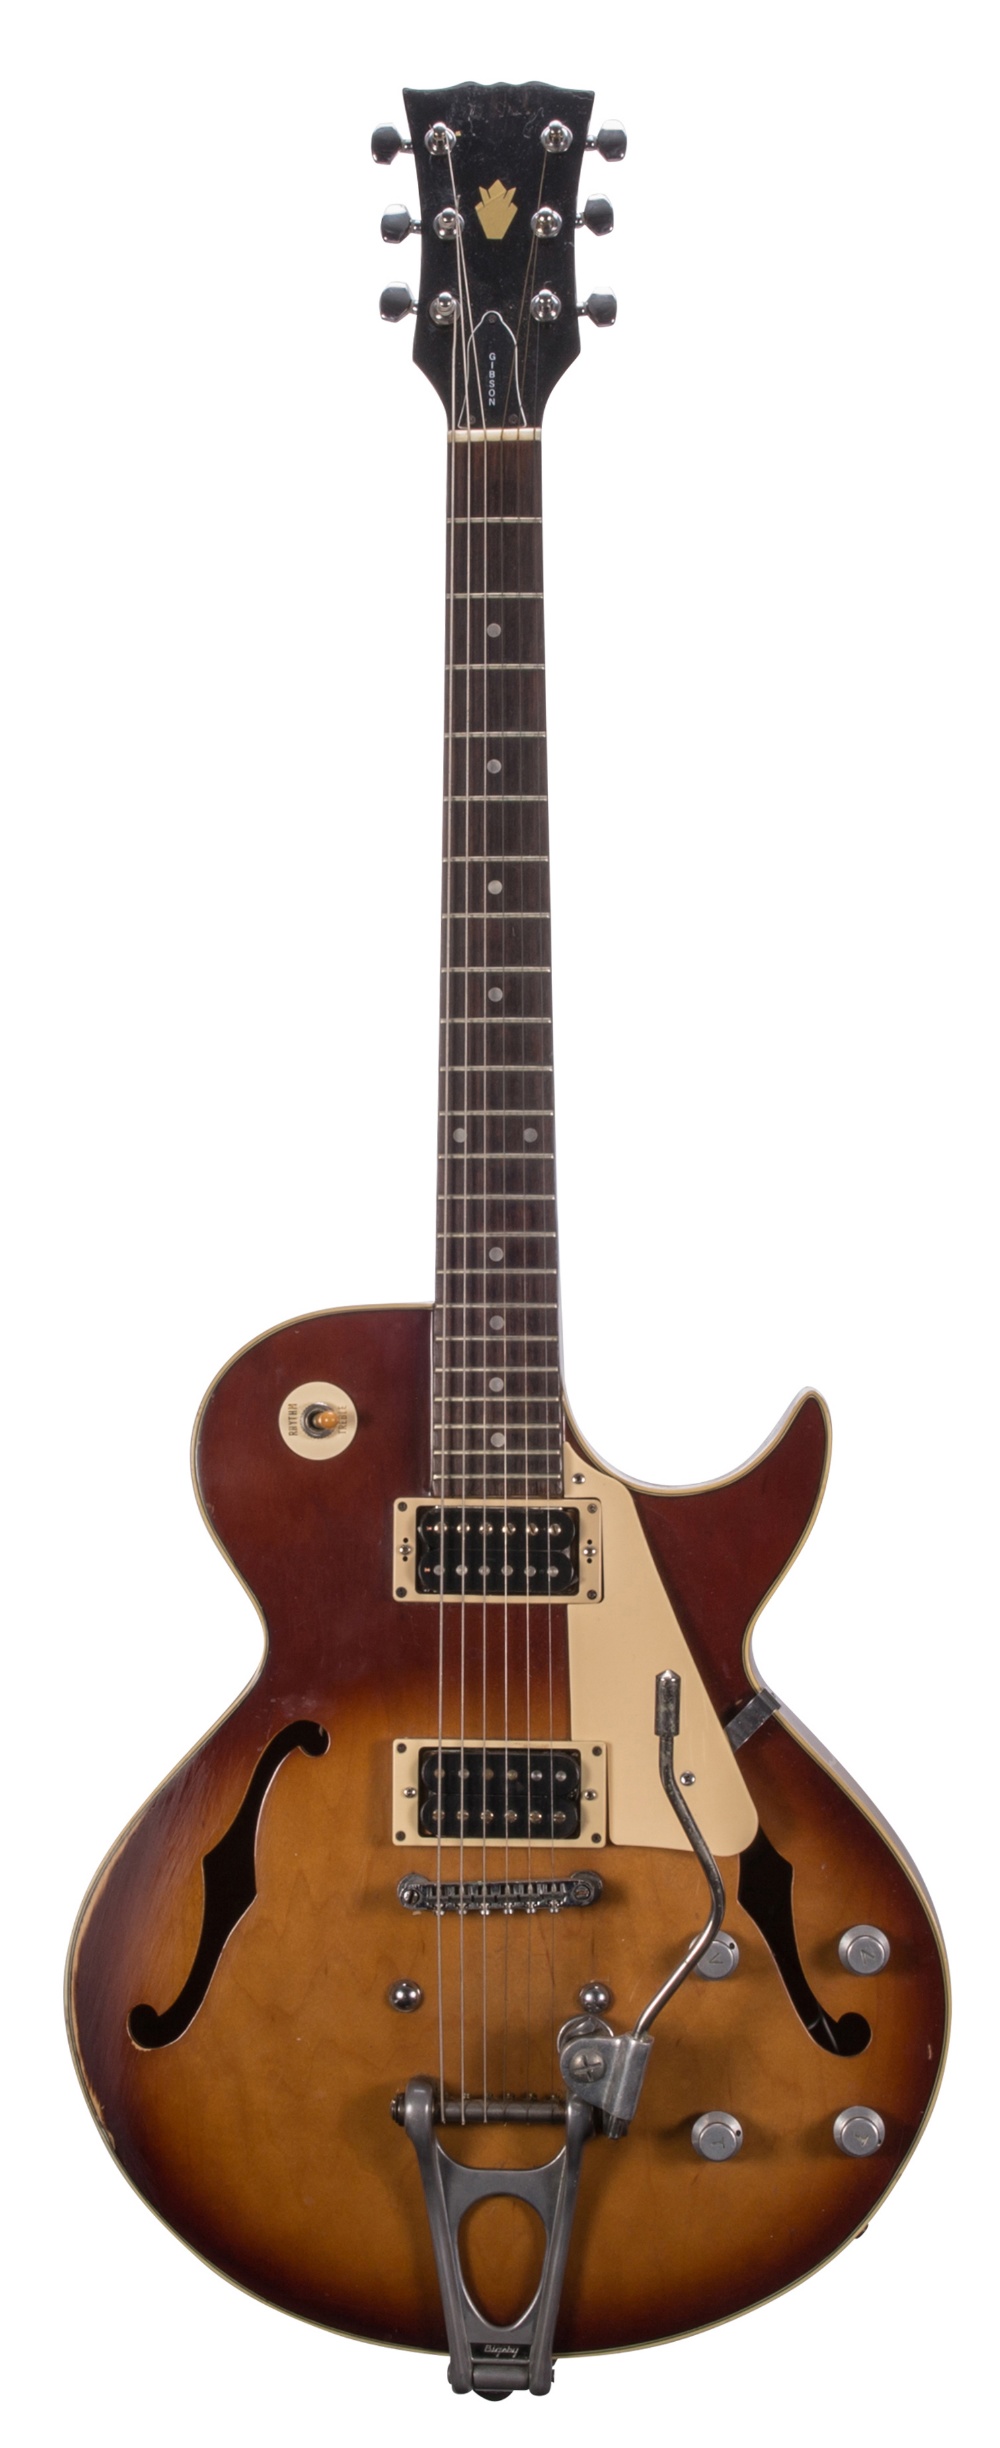 1970s unbranded hollow body electric guitar; Finish: tobacco burst, rubbing to the edges and various